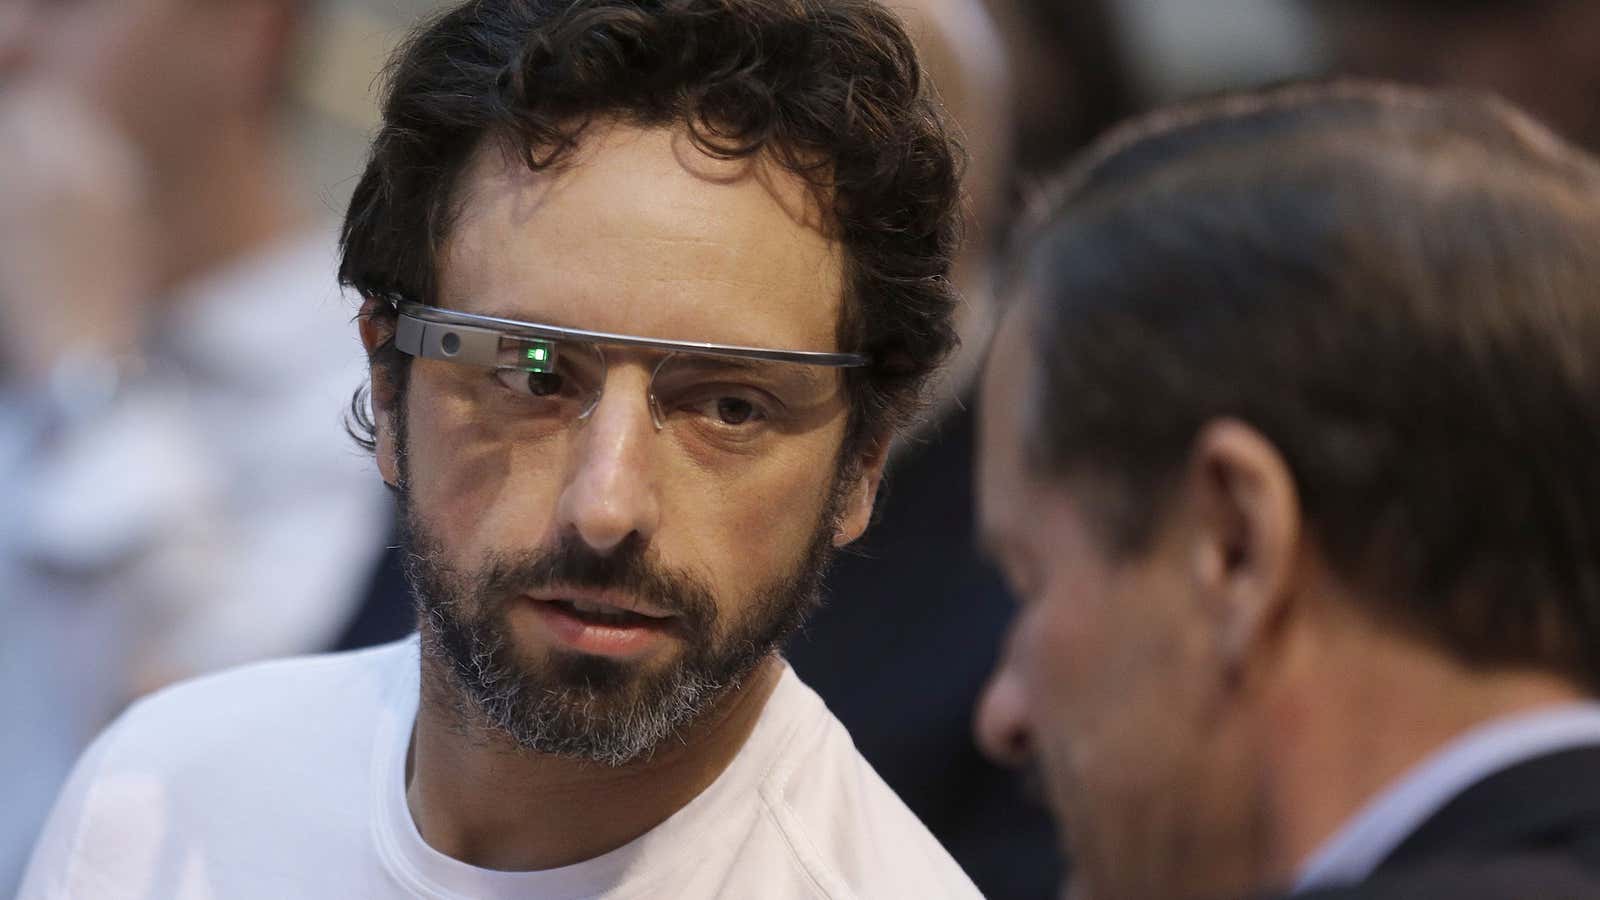 And all this time, Sergey Brin wasn’t looking at you; he was looking at your CEO.